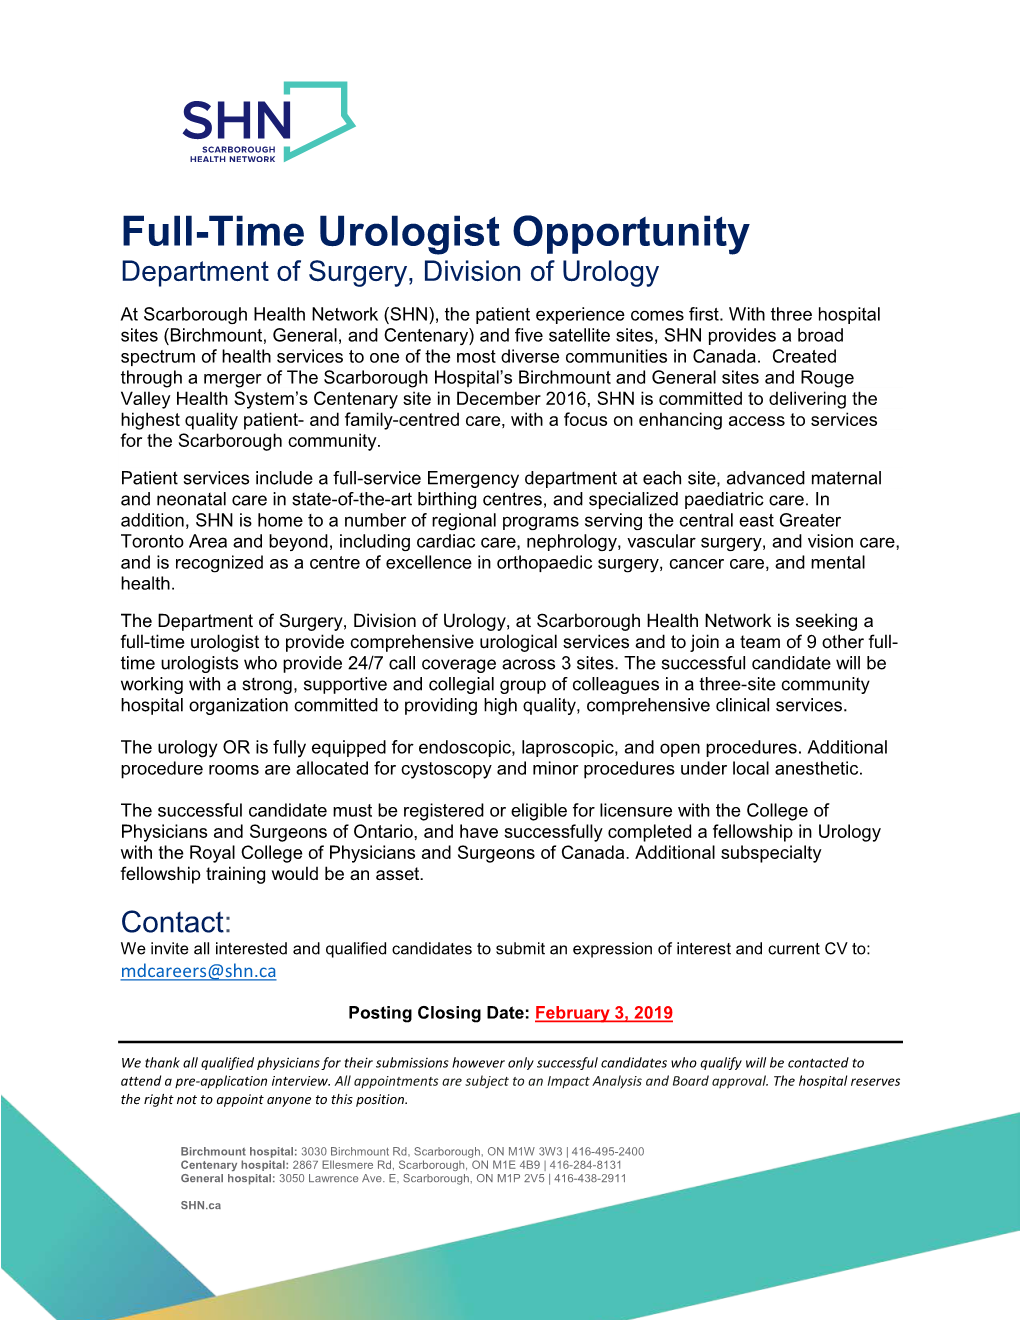 Full-Time Urologist Opportunity Department of Surgery, Division of Urology at Scarborough Health Network (SHN), the Patient Experience Comes First